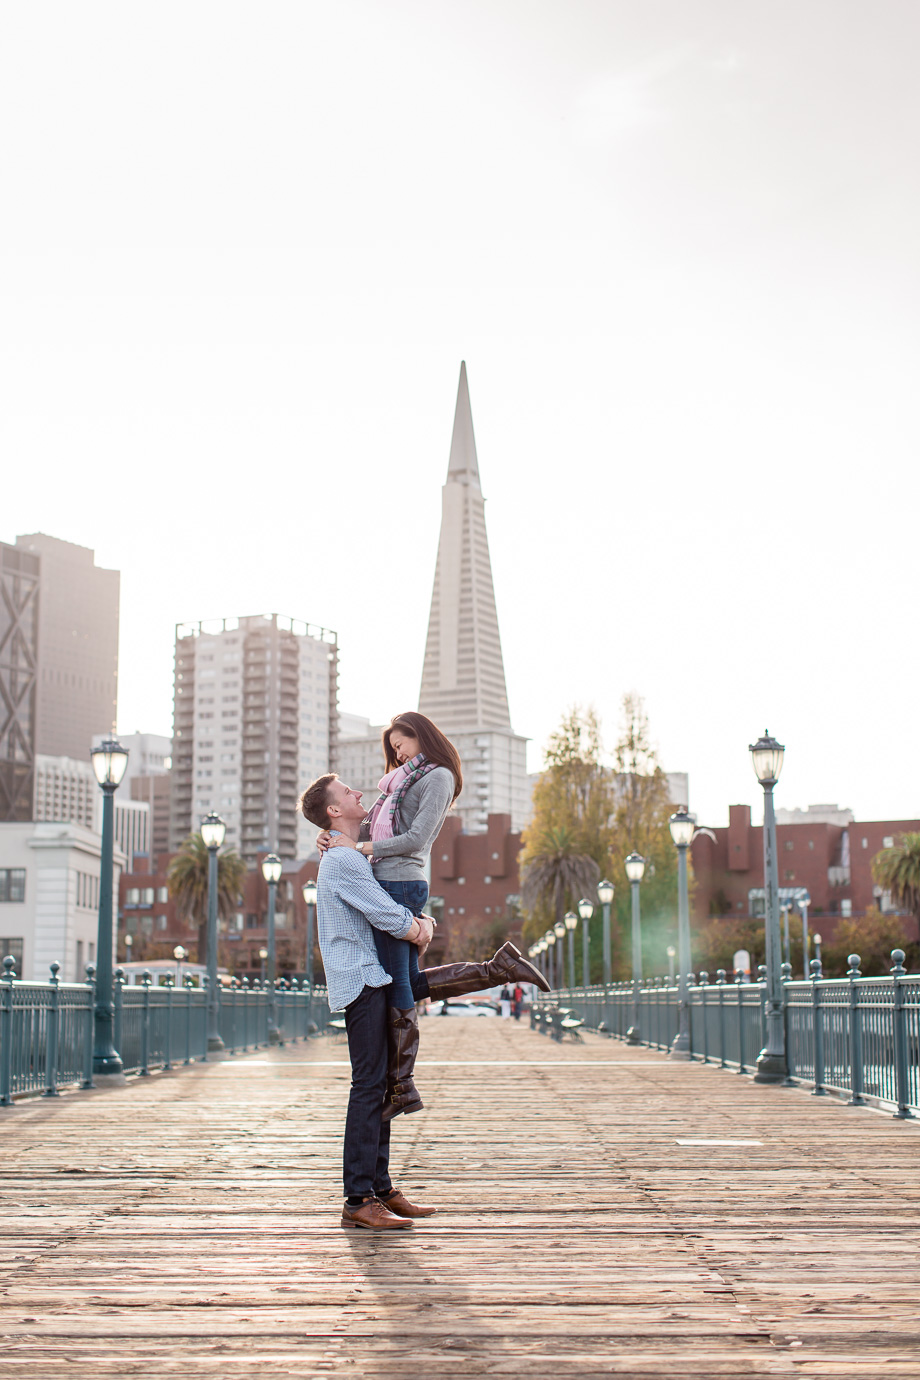 romantic engagement photo at san francisco pier overlooking financial district skyline